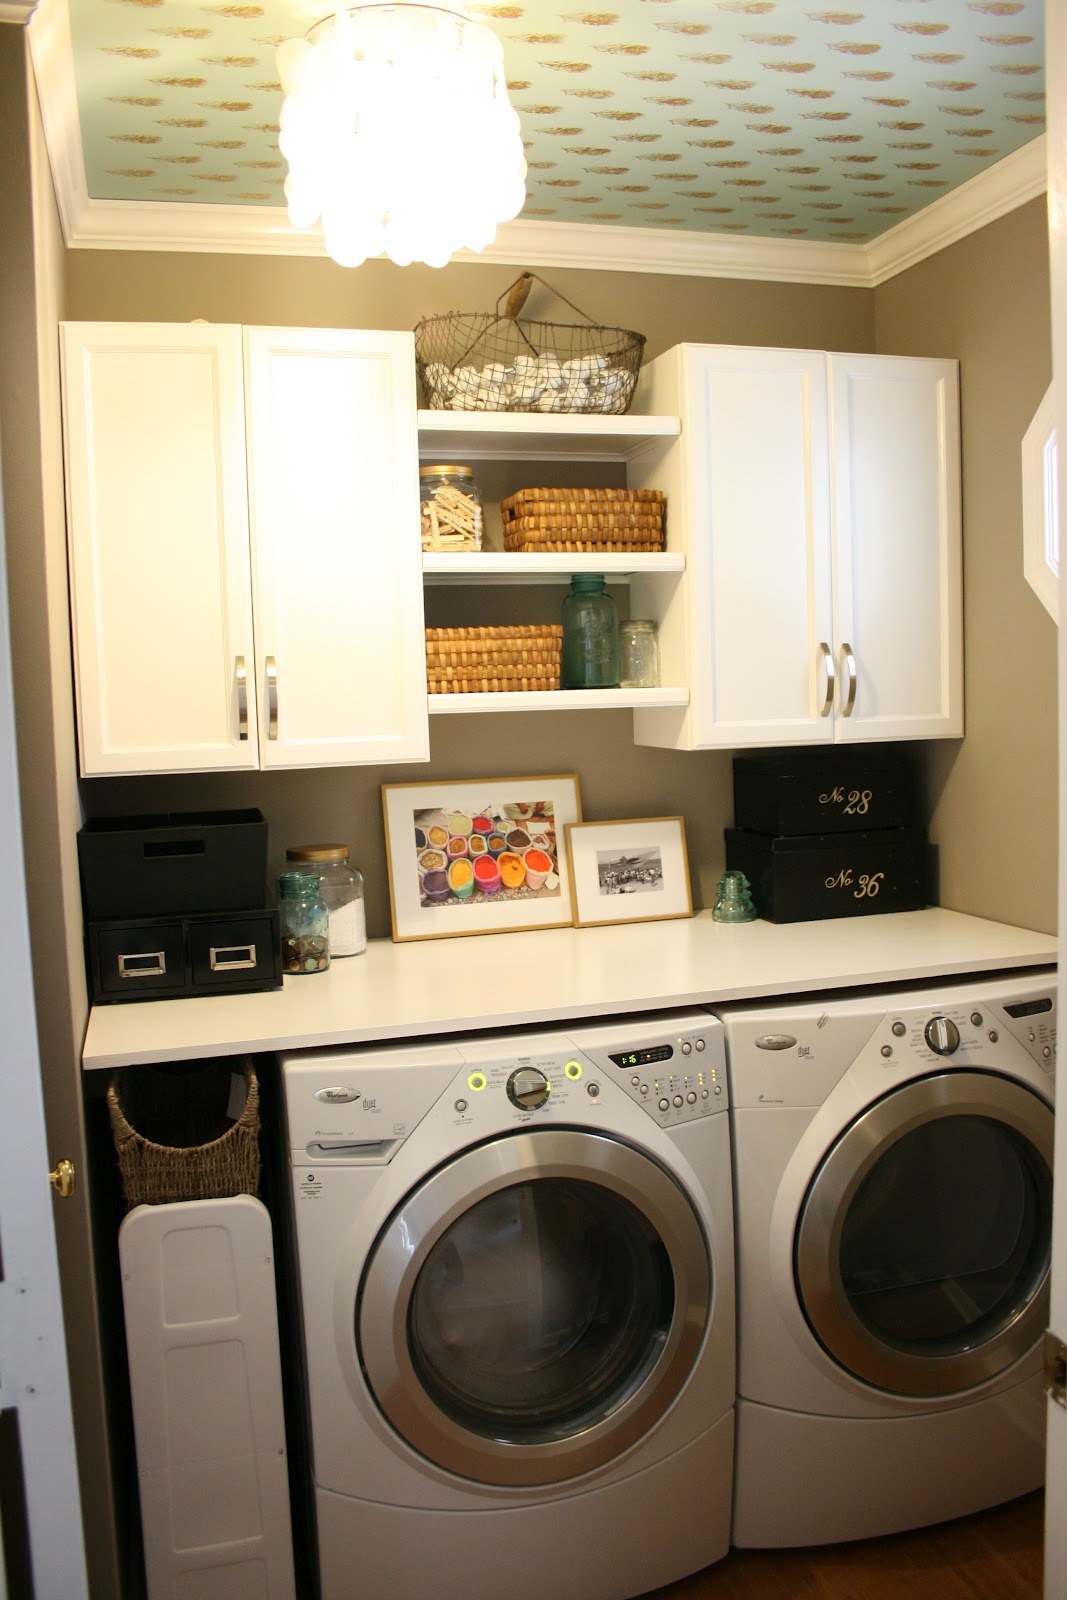 vintage we laundry a and cabinets can also rack Luckily,  have where  behind shelf  we the door